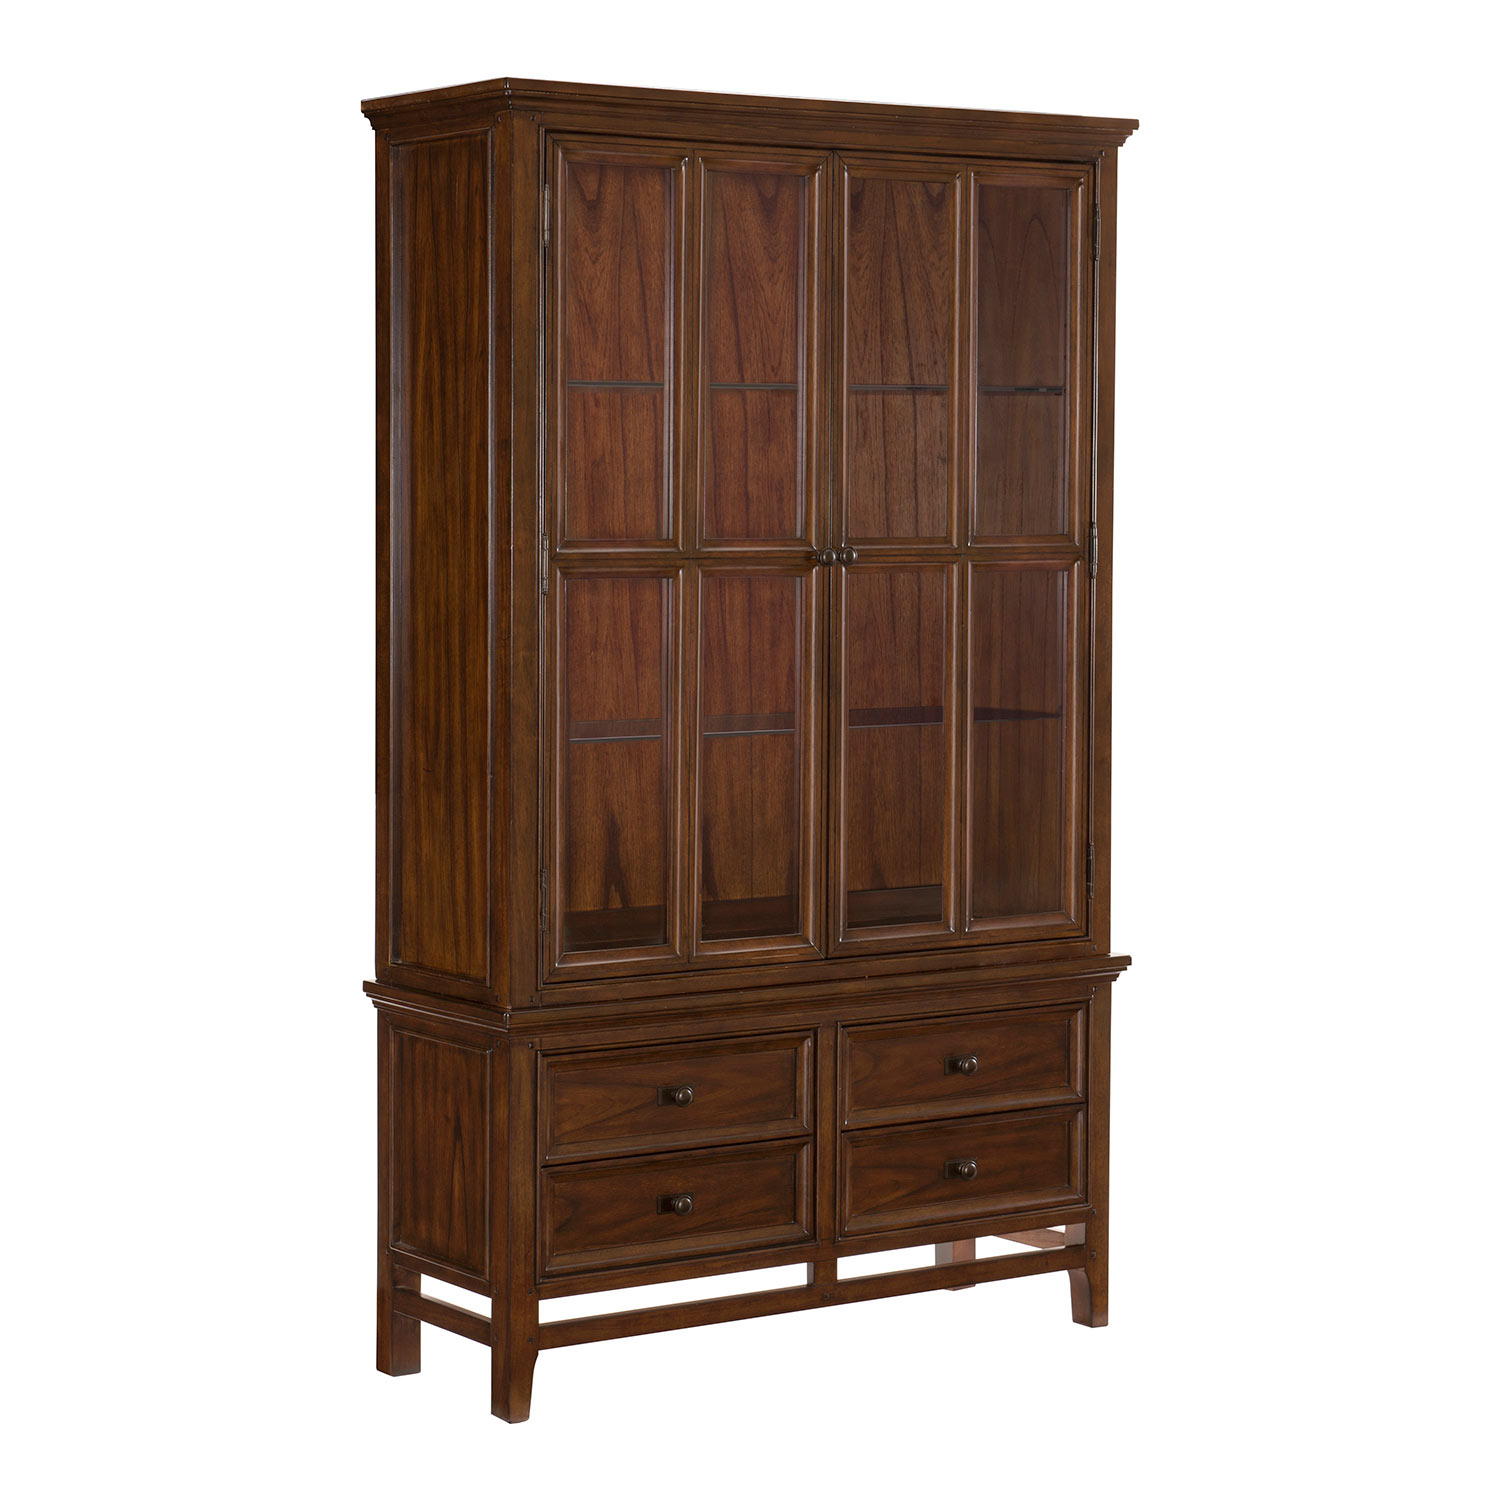 Homelegance Frazier China Cabinet - Brown Cherry